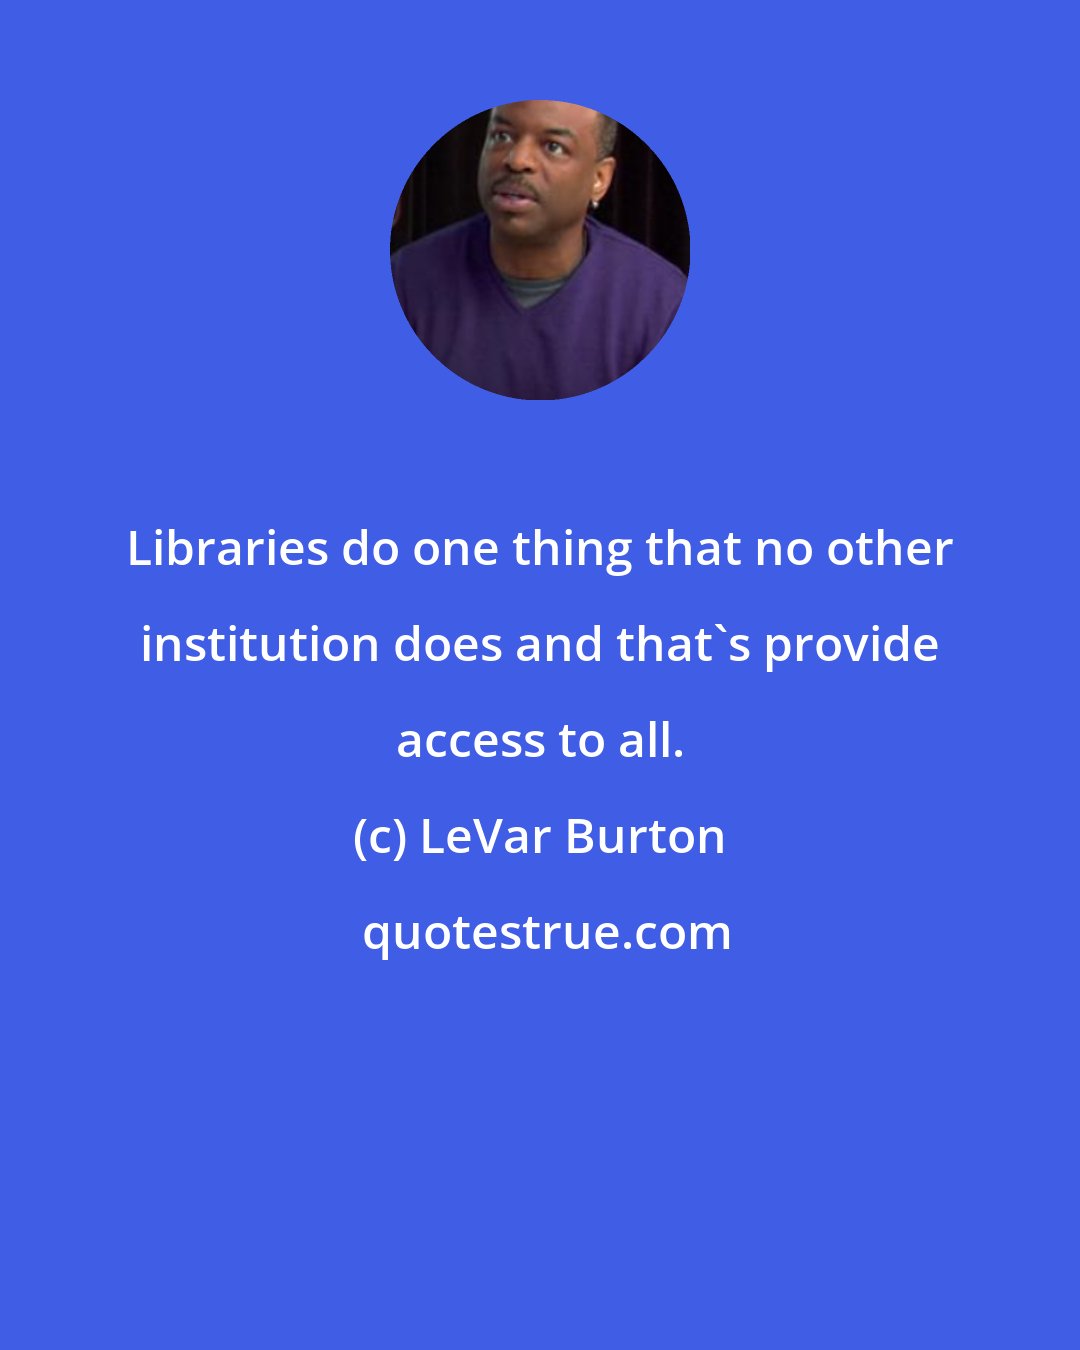 LeVar Burton: Libraries do one thing that no other institution does and that's provide access to all.